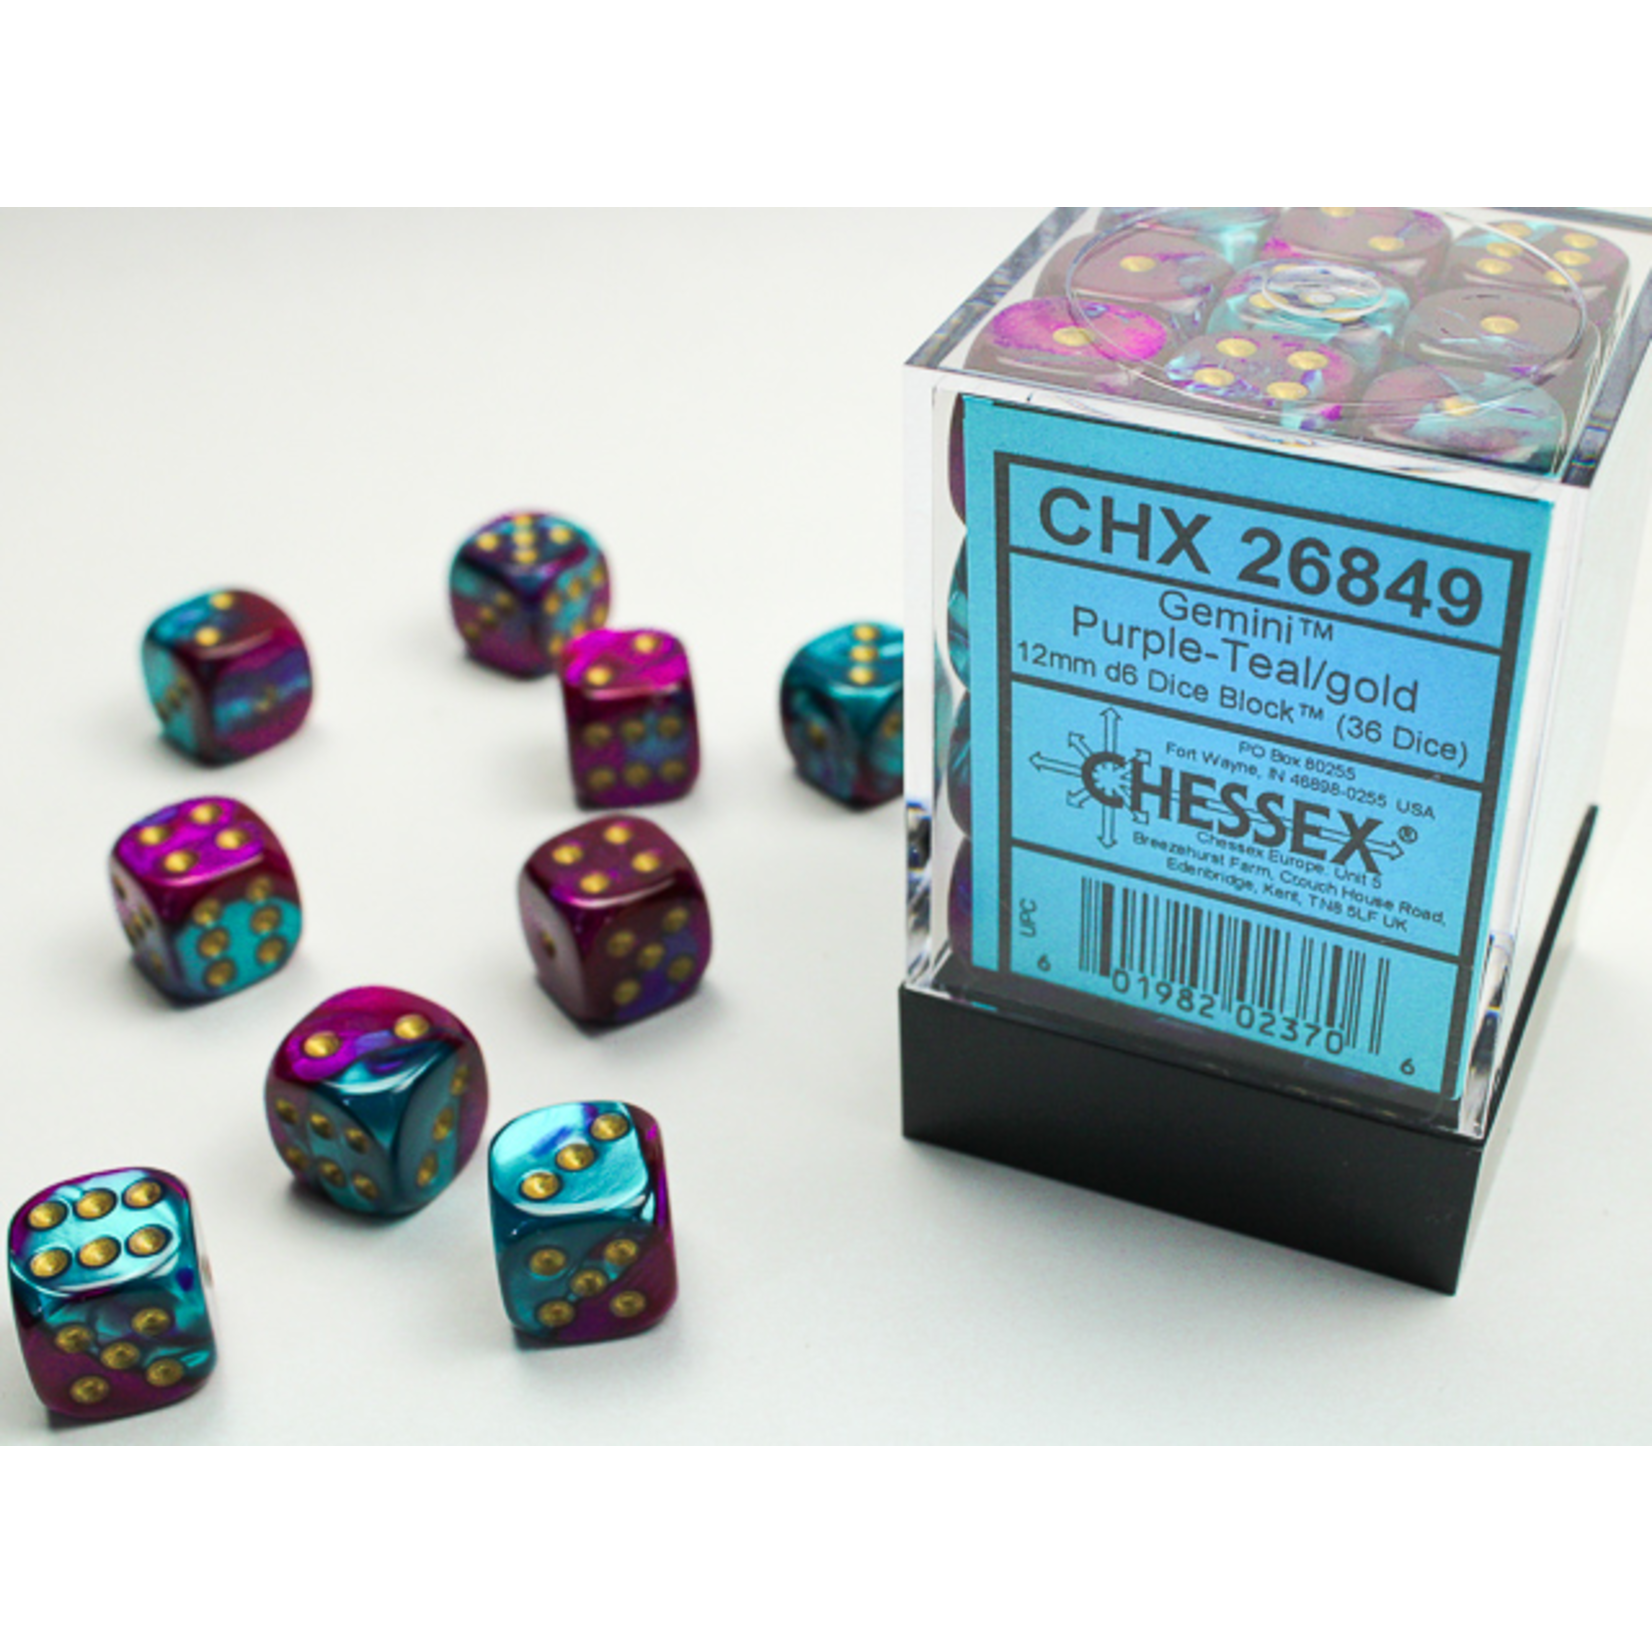 Chessex 36-Piece Dice Set: Gemini Purple-Teal with Gold Pips (12mm, D6s Only)